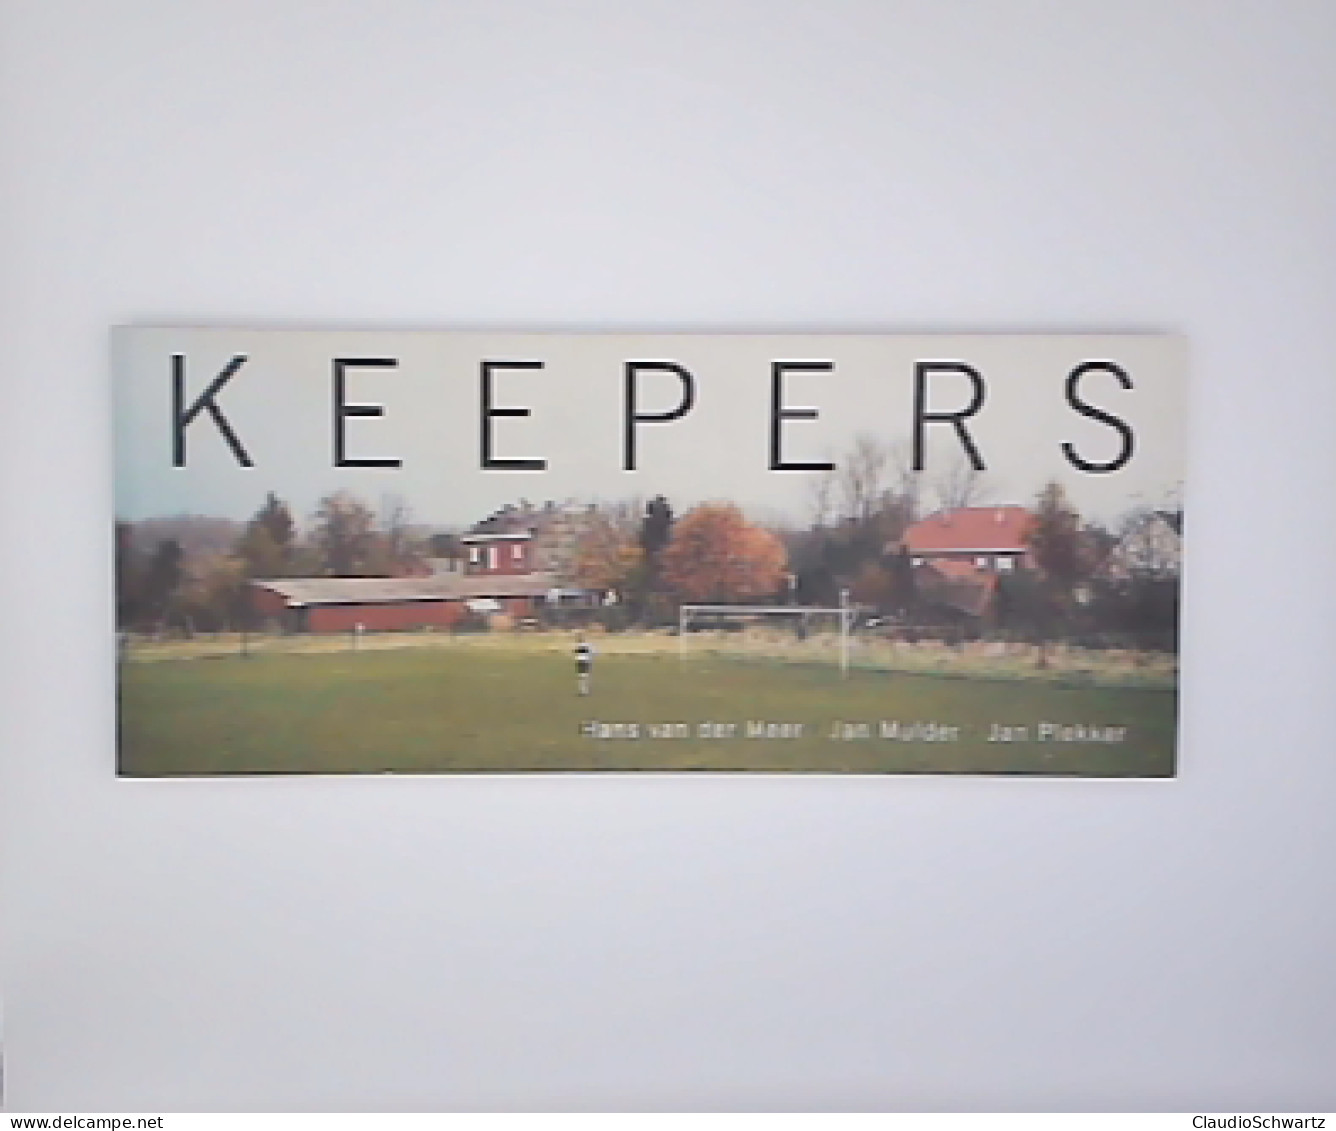 Keepers - Photography